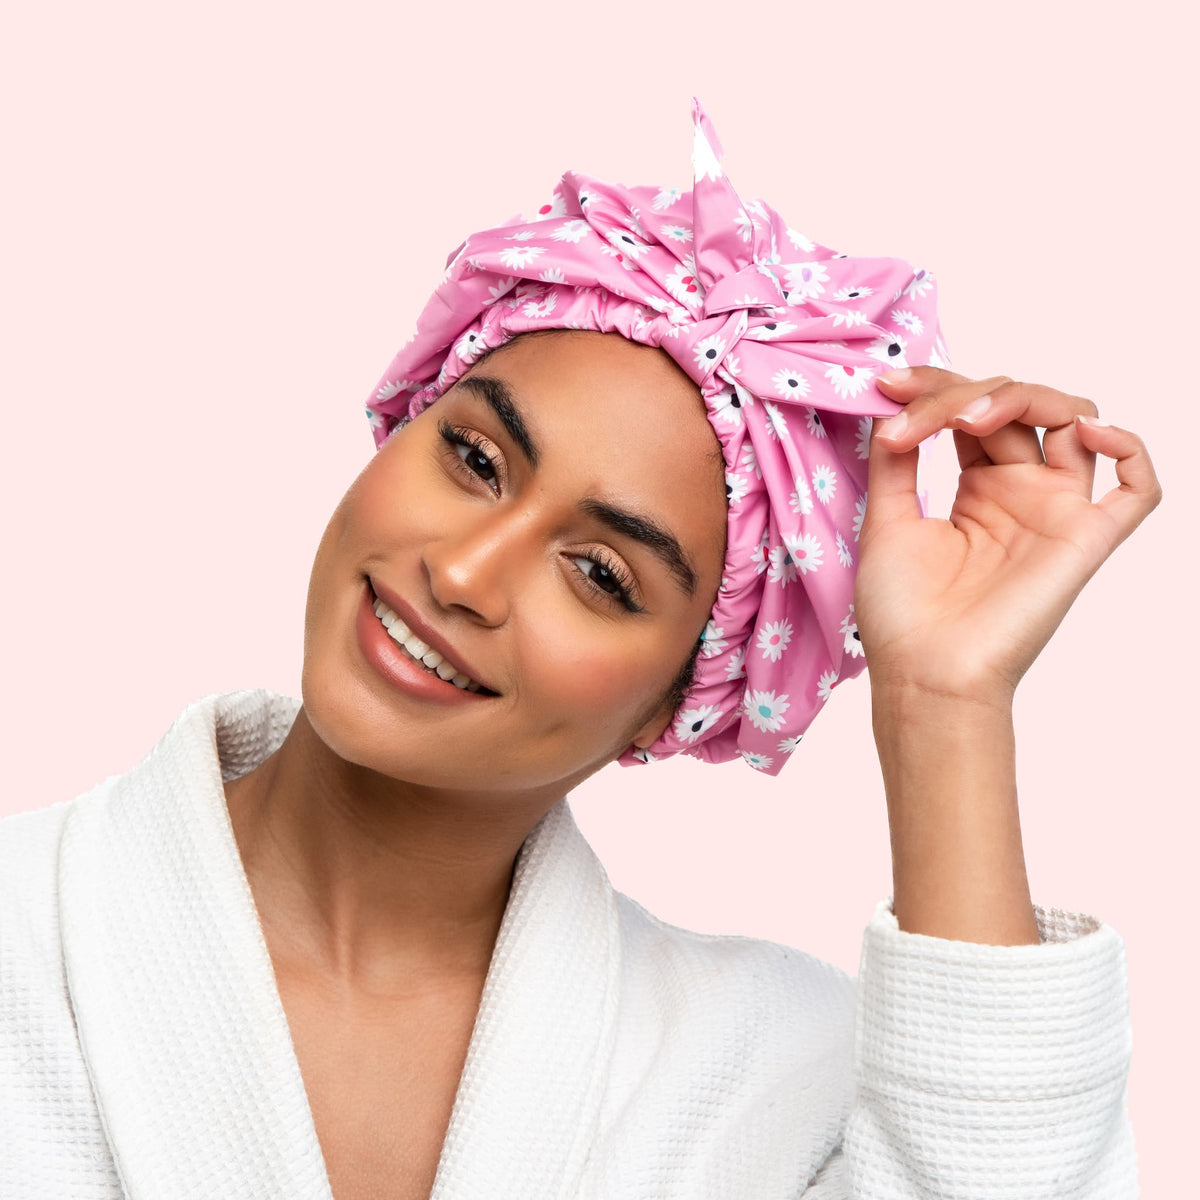 Only Curls Shower Cap - Dusty Pink Daisy - Only Curls